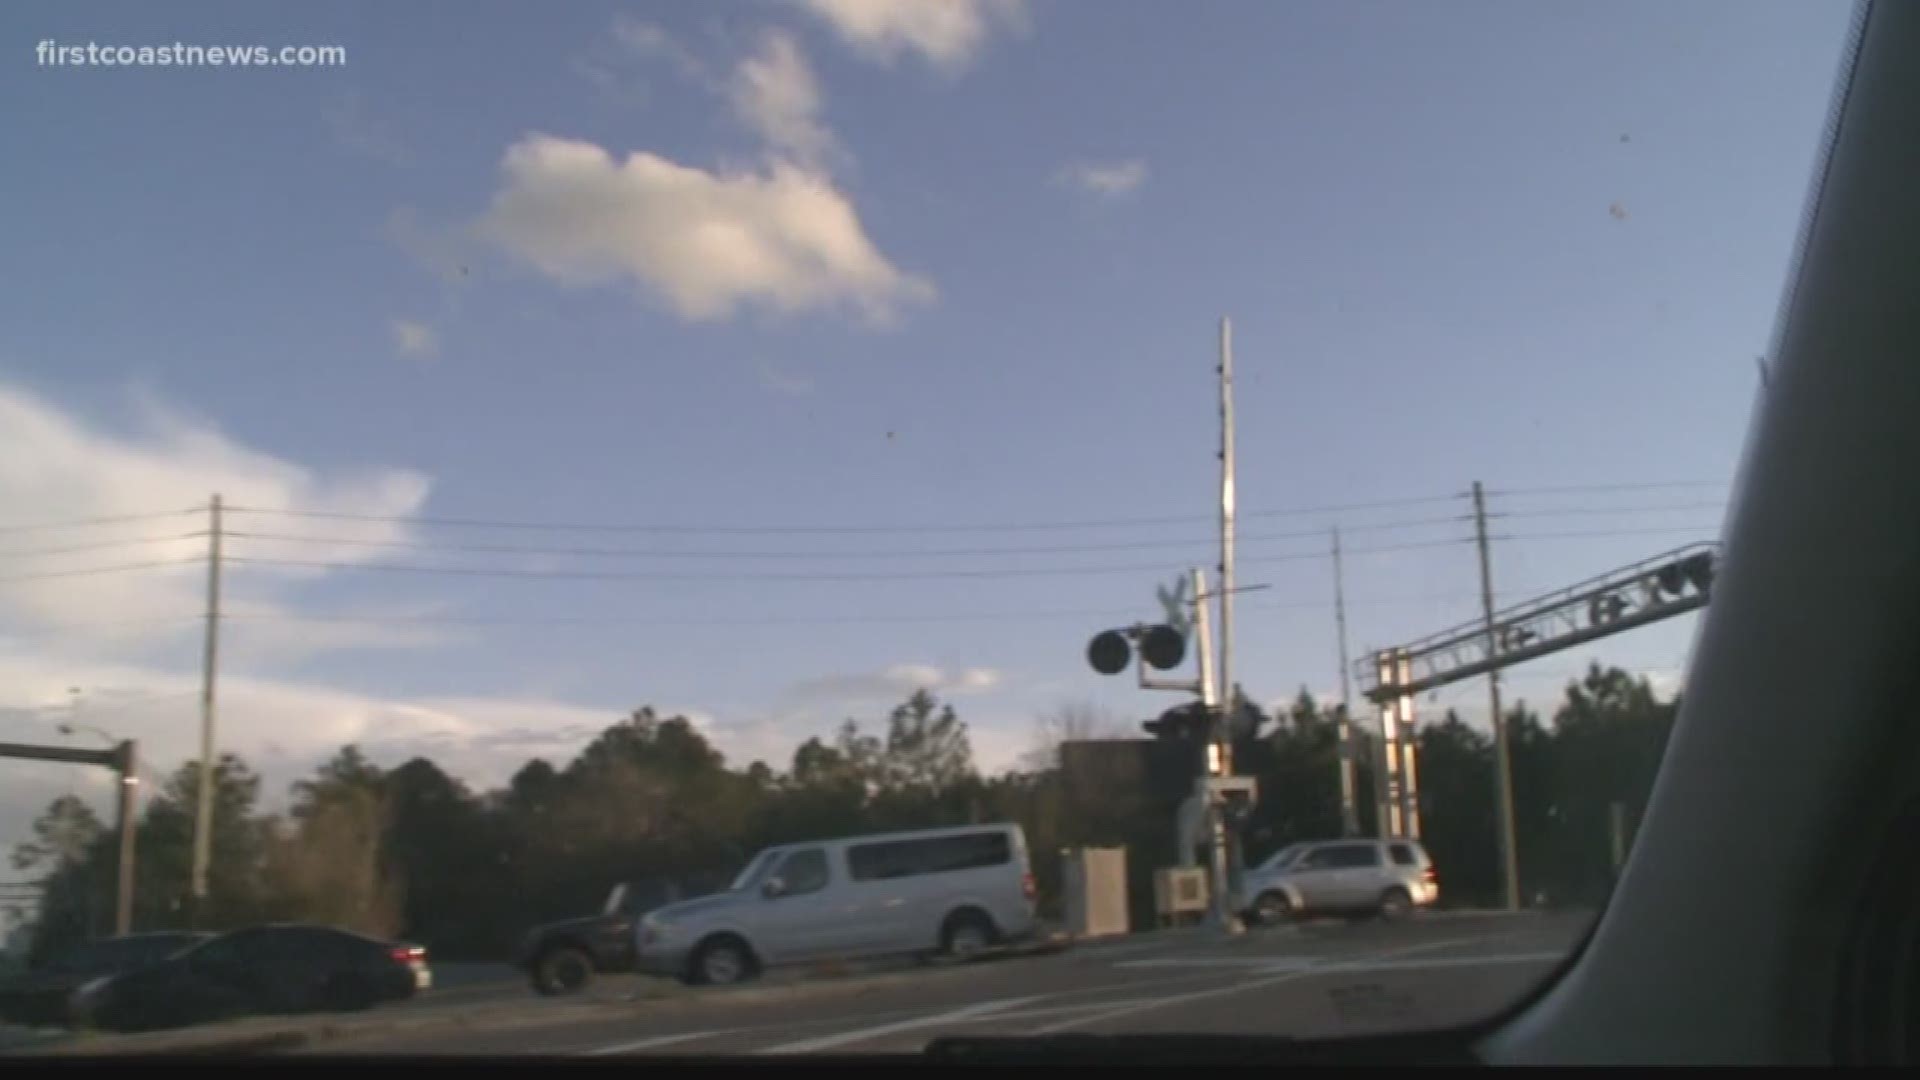 First Coast News continues to dig deeper into the controversial high-voltage power line project going in next to the Bartram Springs community in St. Johns County.